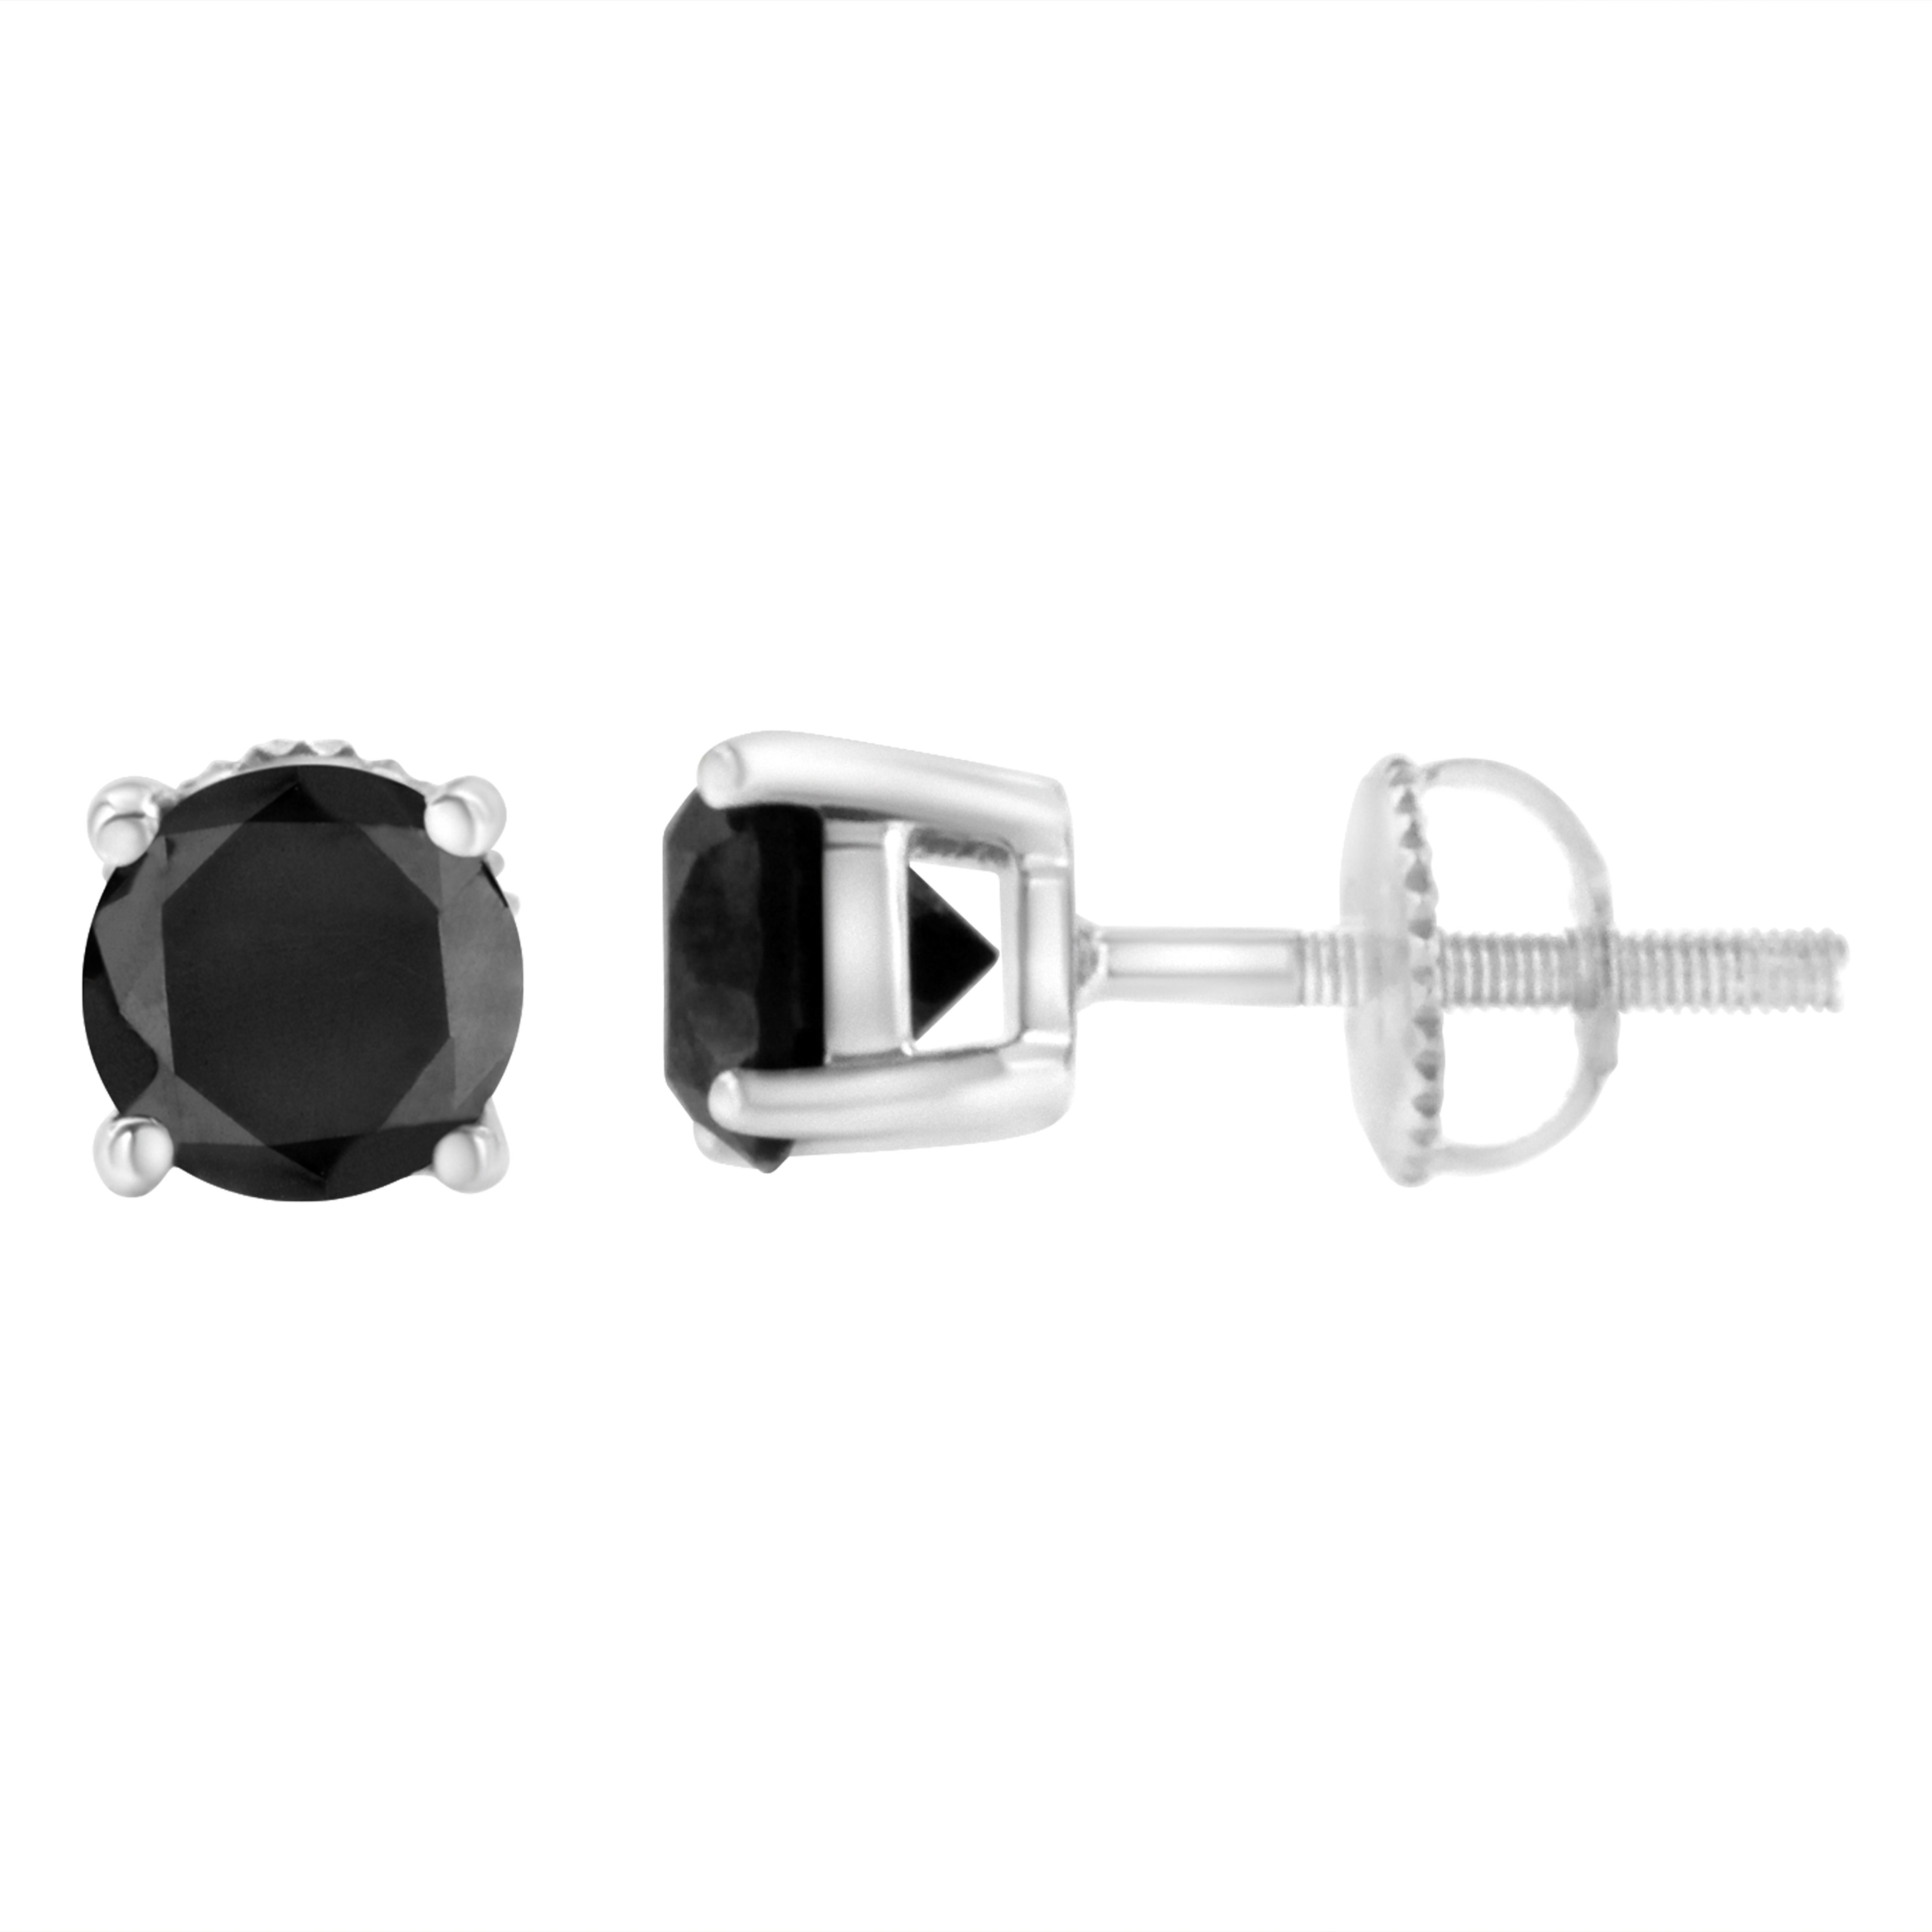 These modern and bold black stud earrings are a true statement piece. Fashioned in 14k white gold, 2 cttw of color treated, round cut twinkling black diamonds are held in a four prong setting. A screw back mechanism holds the earrings secure in